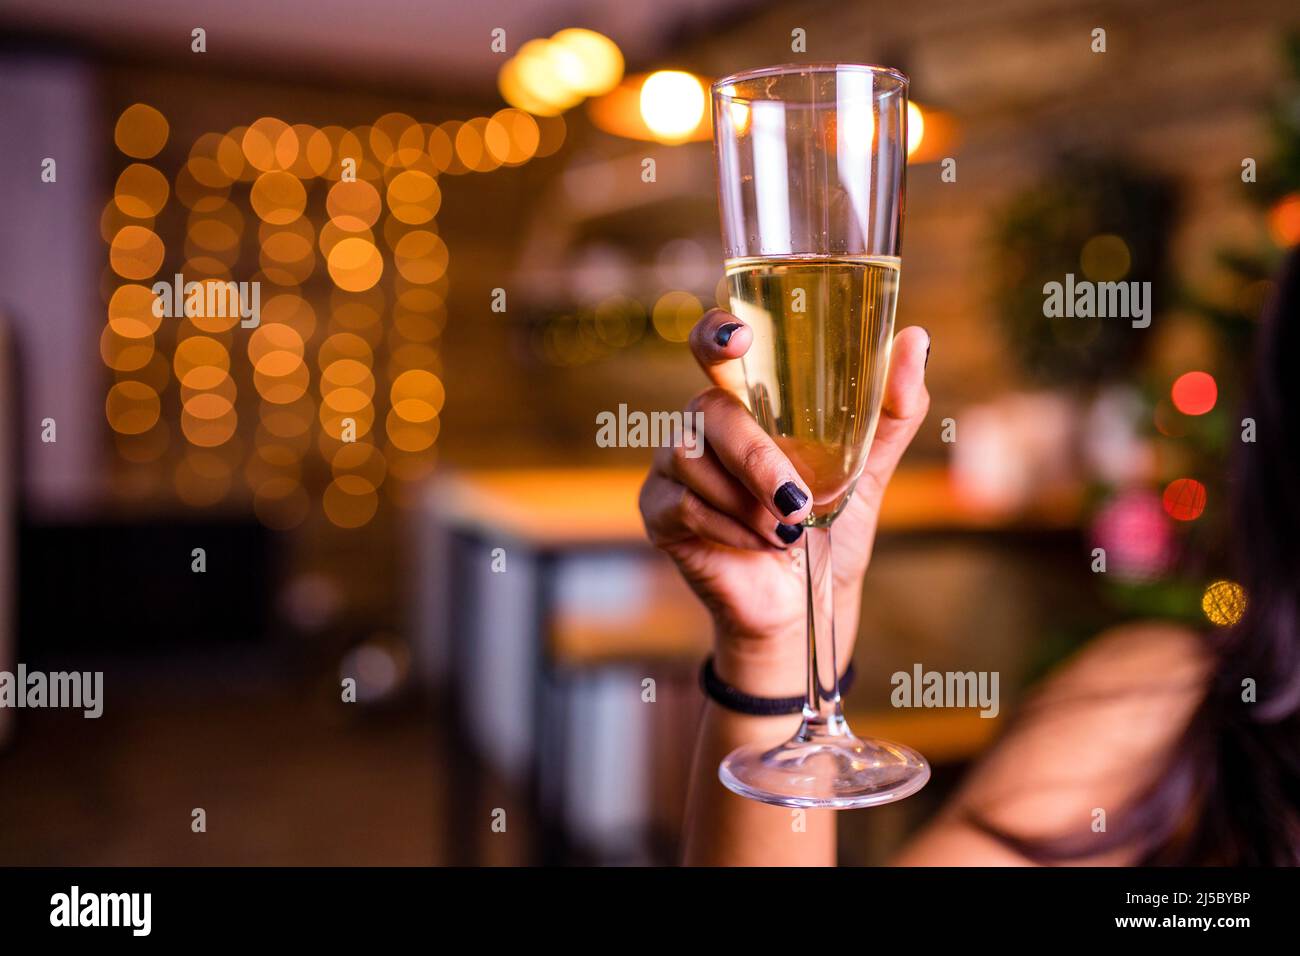 indian woman drinking alcohol at studio shot spruce Christmas tree lights garland background Stock Photo